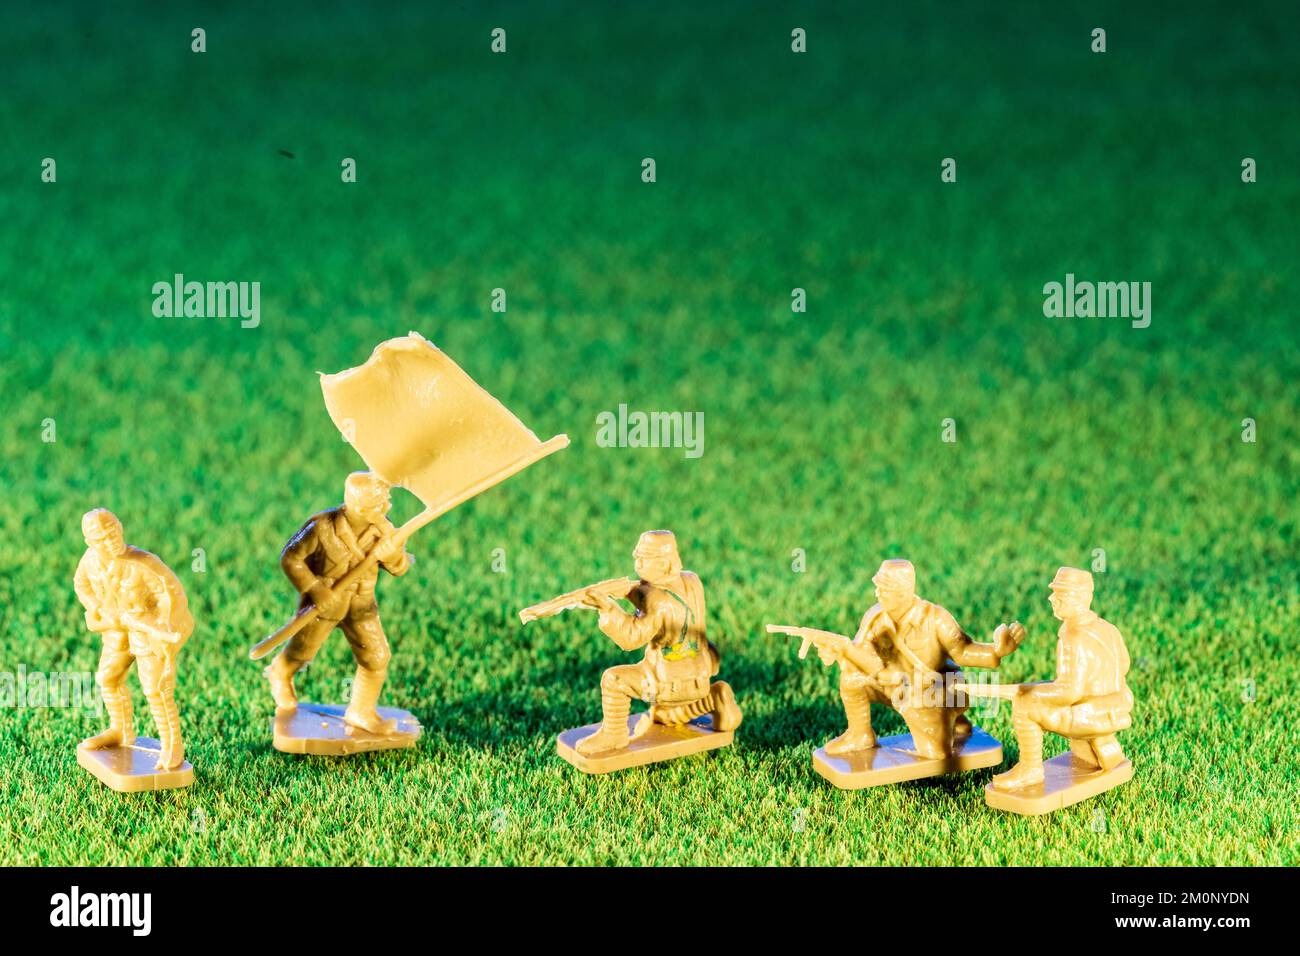 Airfix HO/00 scale plastic model figures. Five Japanese infantry from world war two, various figures in poses on green grass texture background Stock Photo